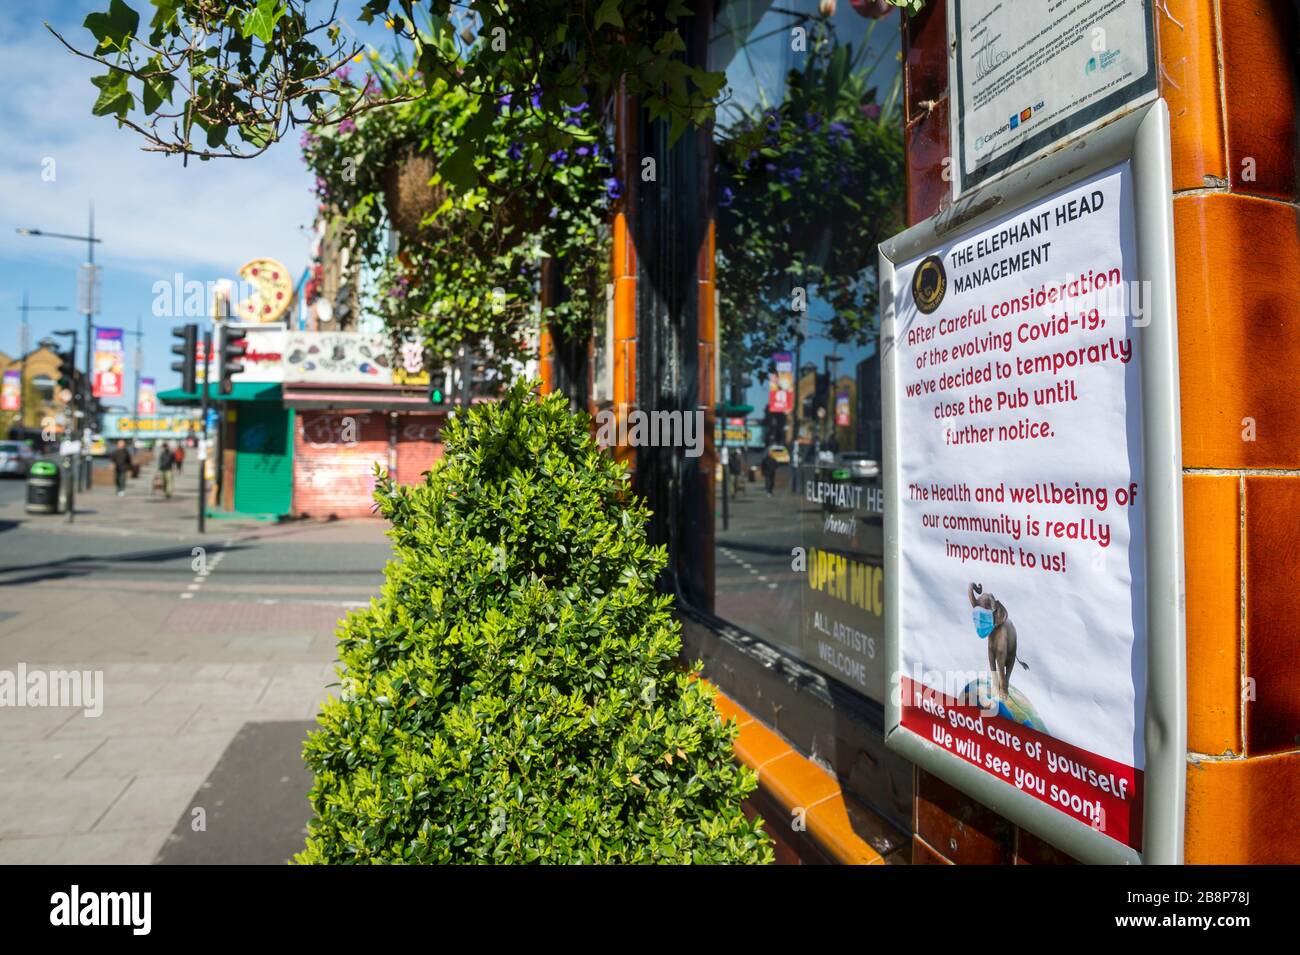 LONDON - MARCH 22, 2020: A sign outside the Elephant Head pub in Camden Town faces empty streets during the recent Coronavirus pandemic lockdown. Stock Photo